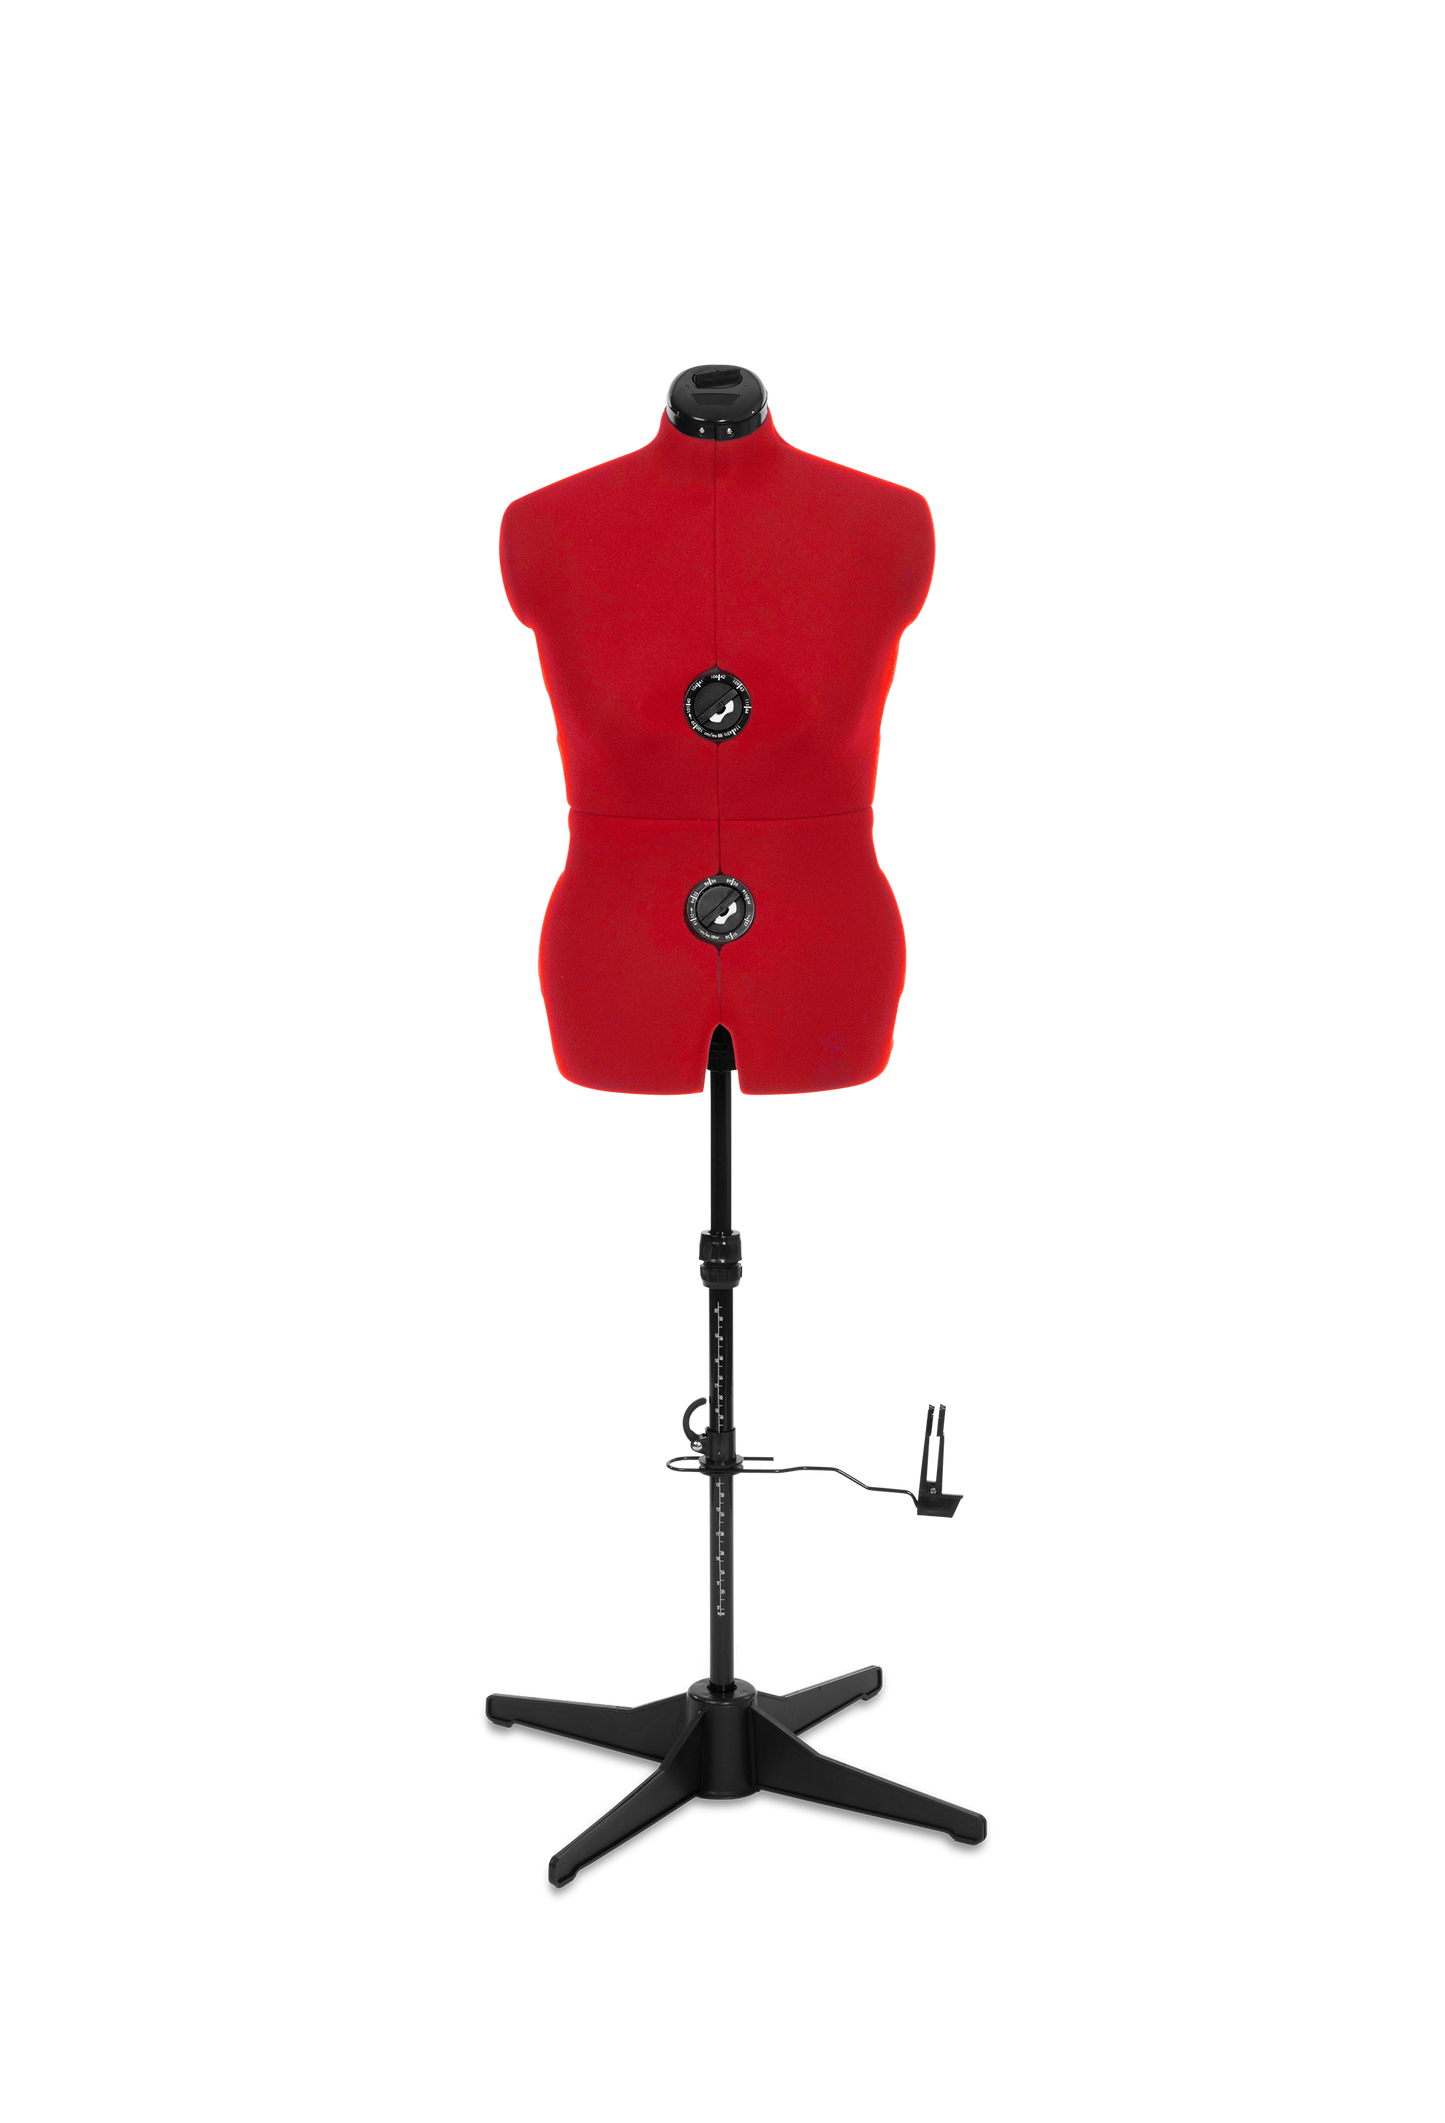 Adjustoform Tailormaid Adjustable Dress Form * Limited Edition Signer Red * 11 adjusters - Dress sizes 6 to 22 in 2 size options - Made in the UK